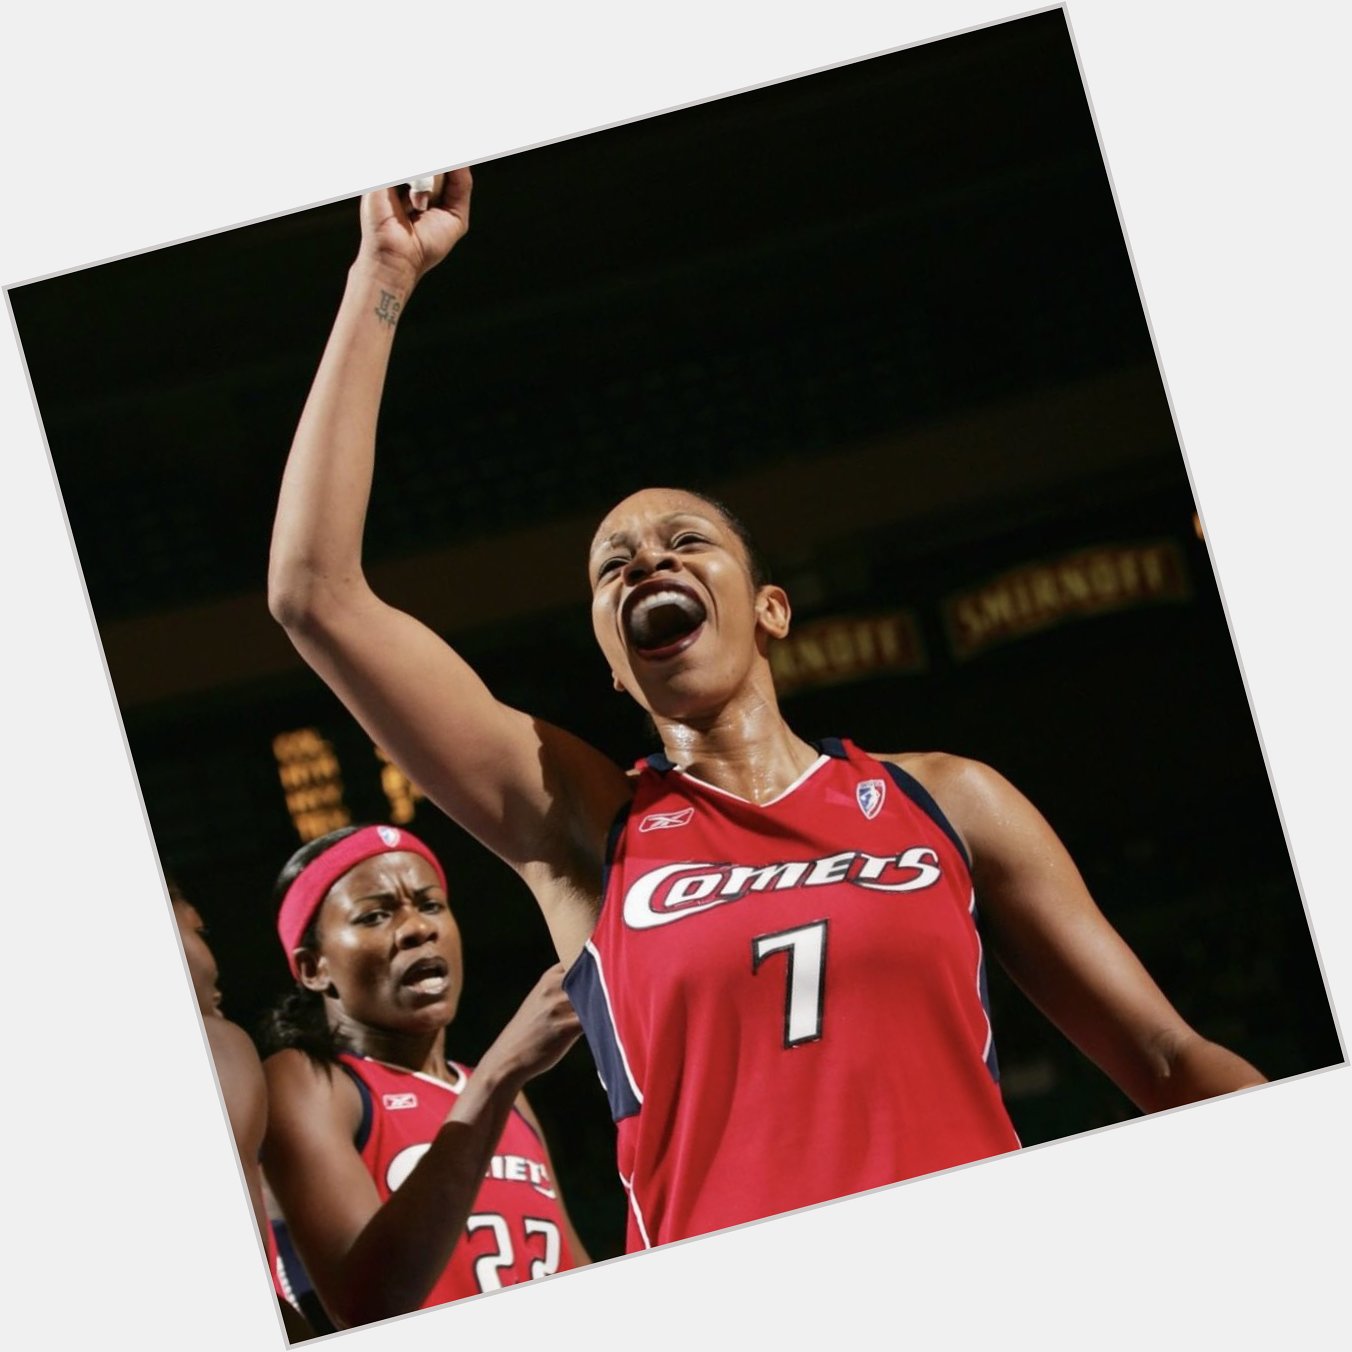 Happy birthday to one of the best ever Tina Thompson 